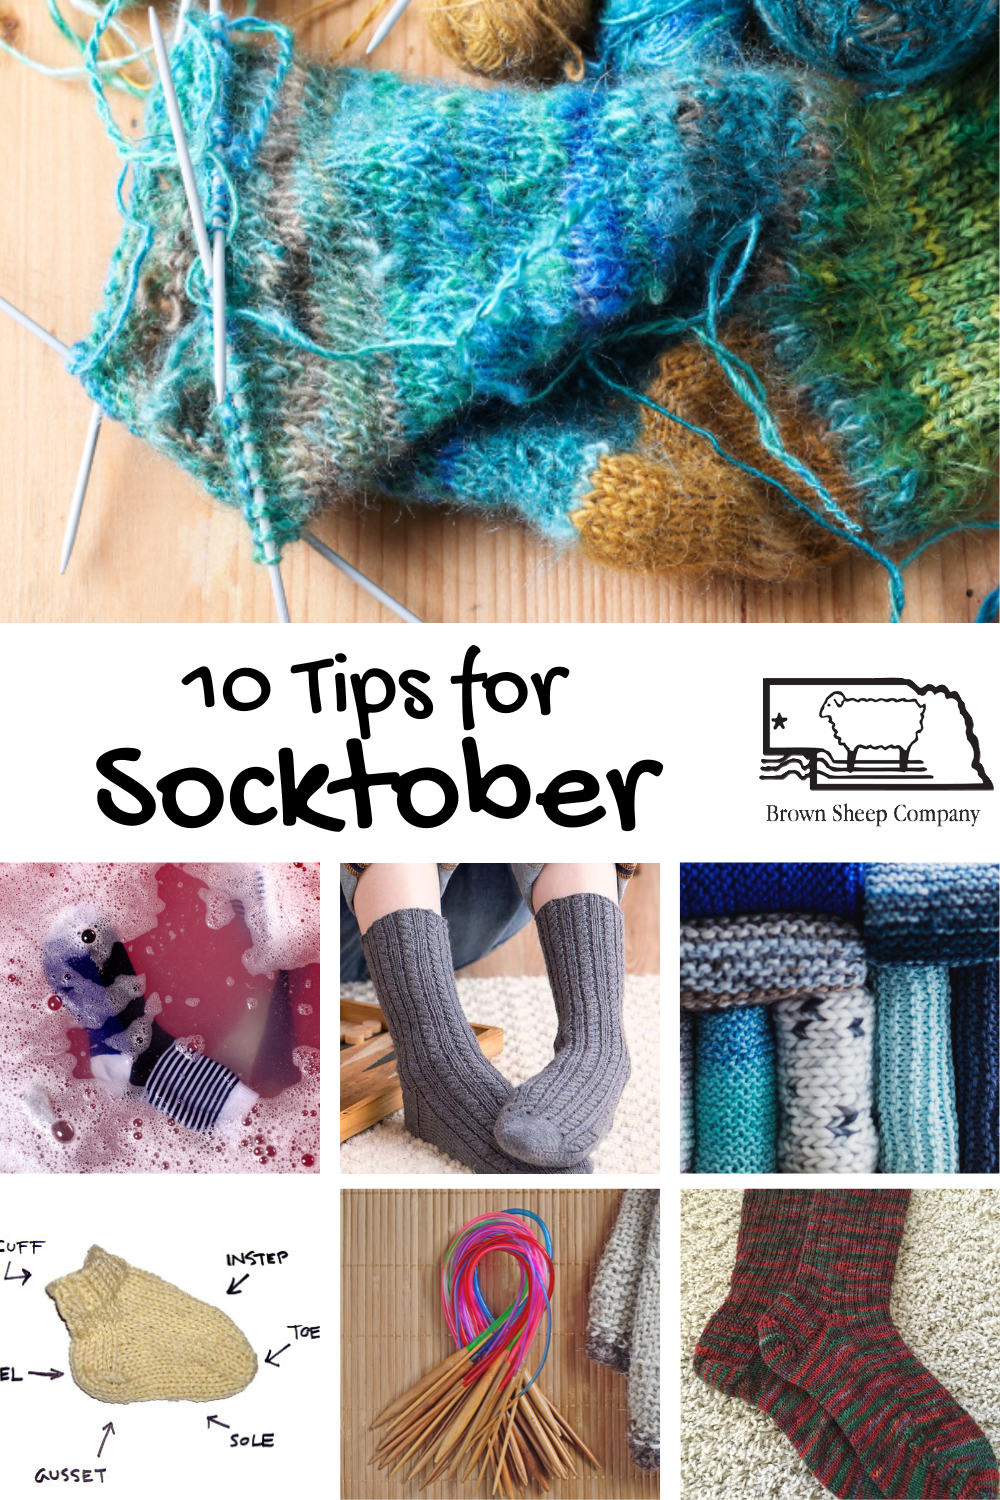 What Is The Best Yarn For Knitting Socks?